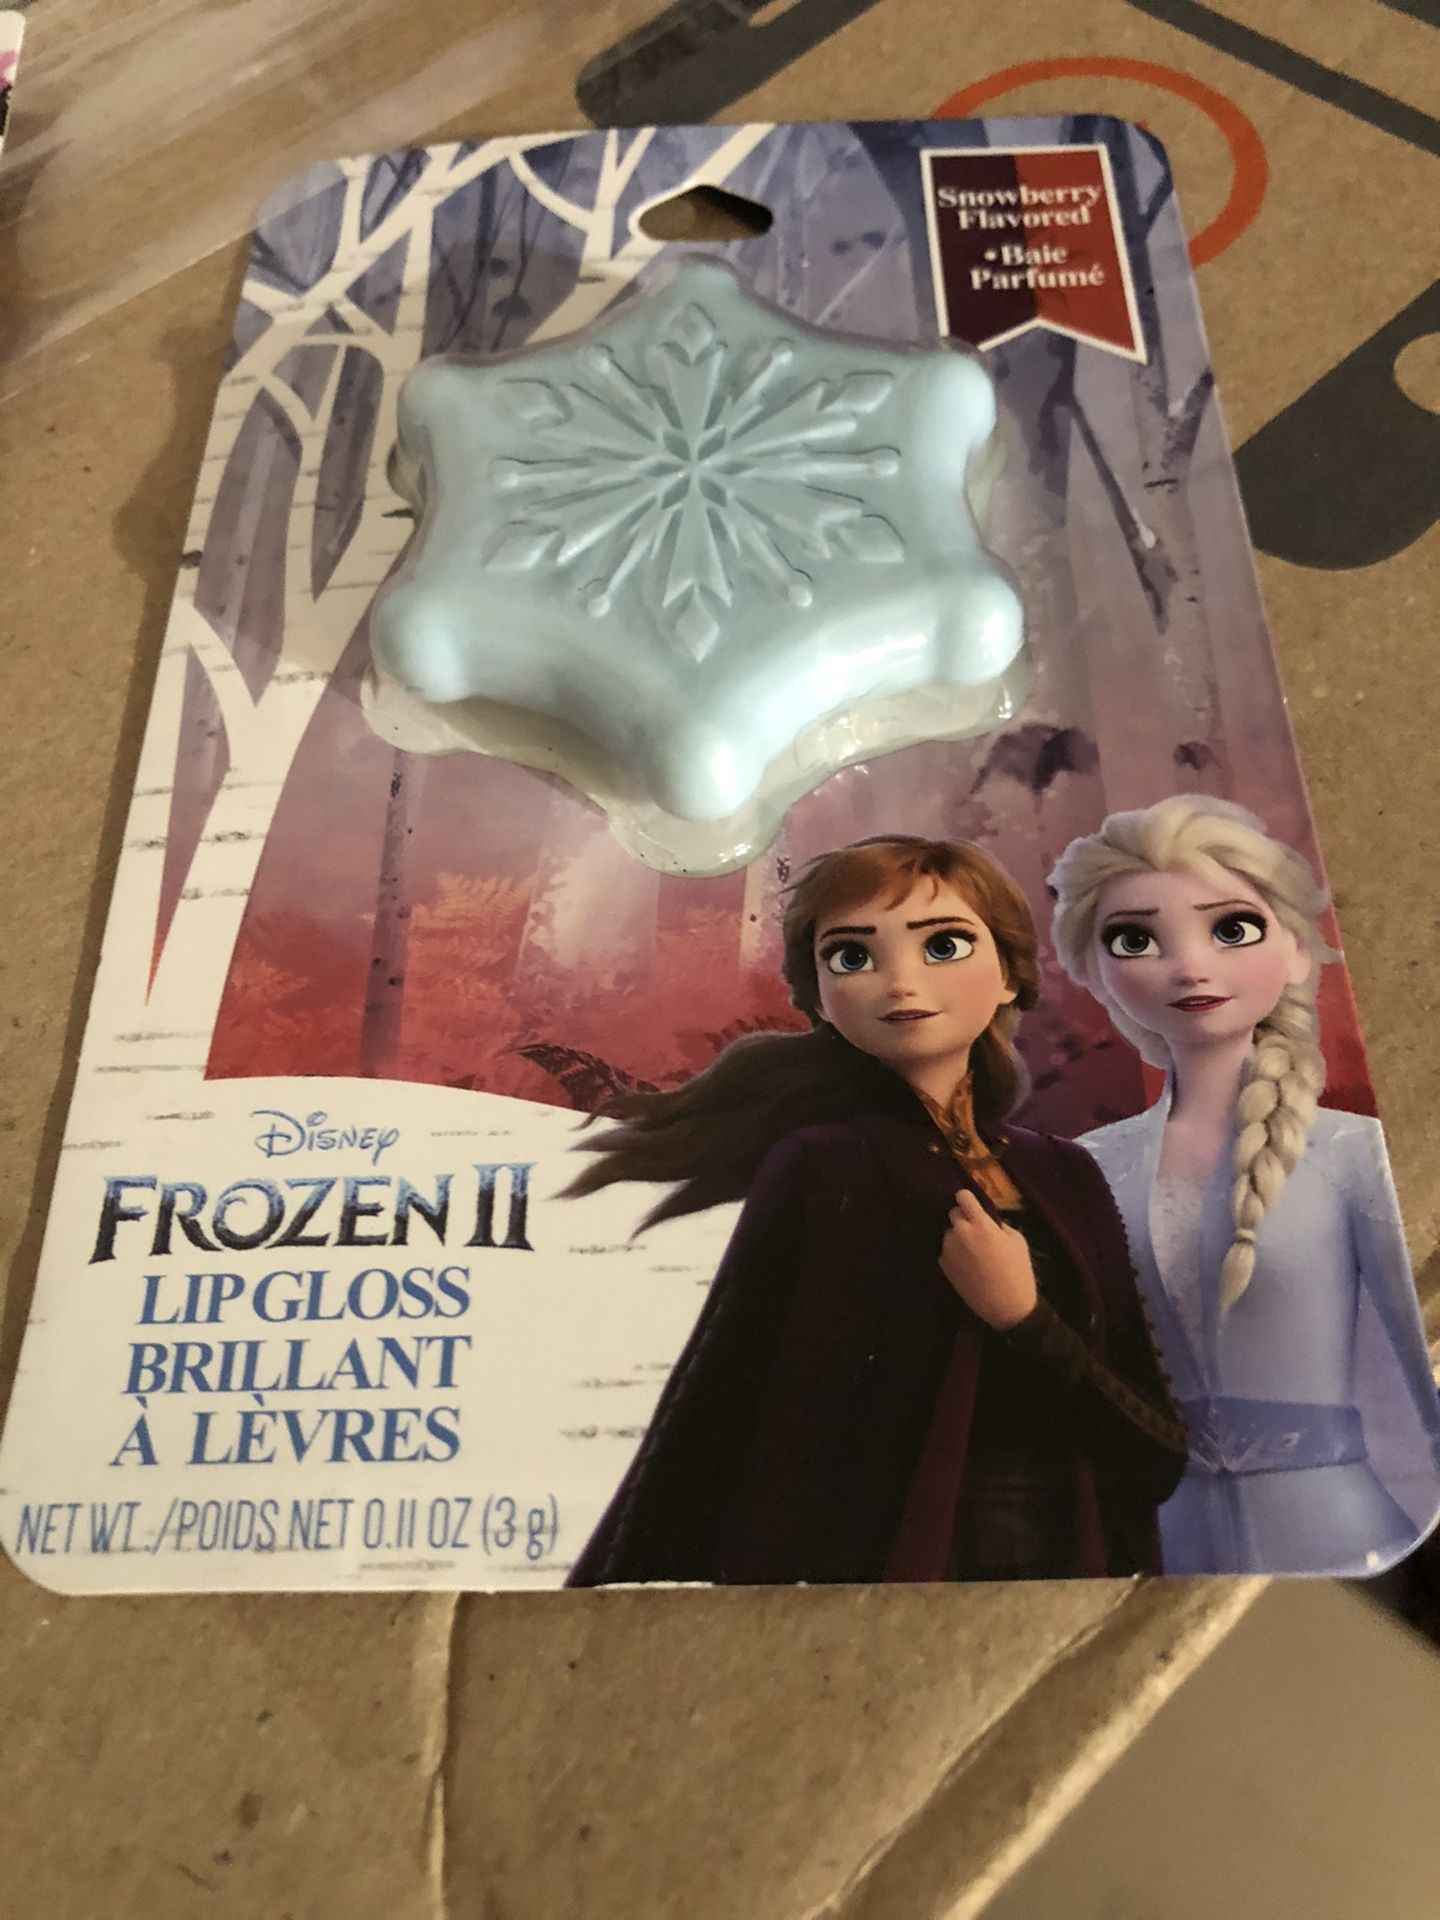 Frozen II Lipgloss Snowberry Flavored